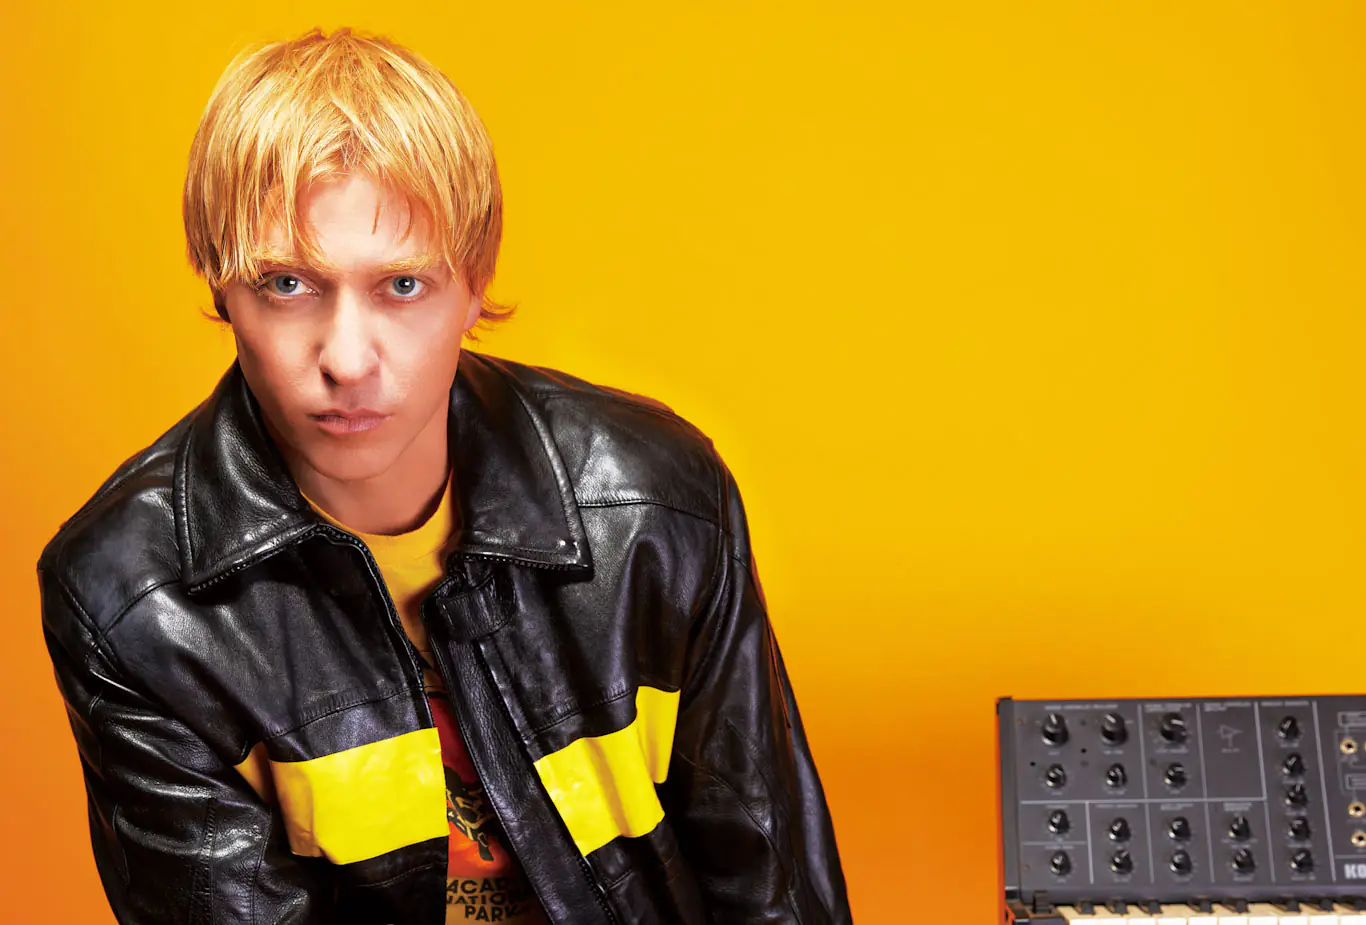 THE DRUMS announce new album ‘Jonny’ out Oct 13th – Hear new song “Better”